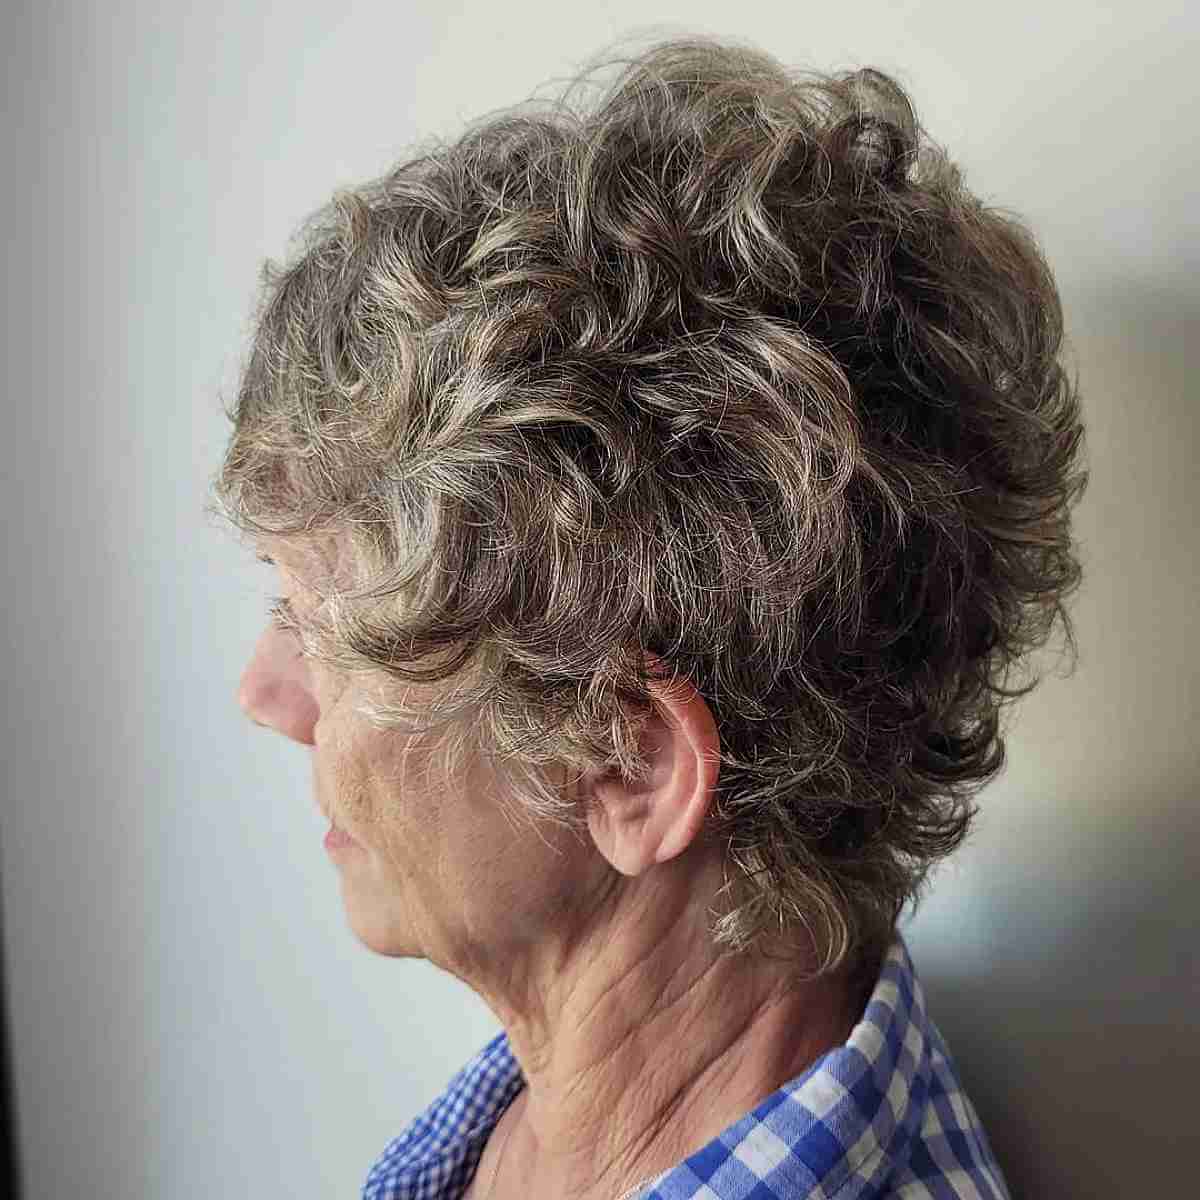 Easy-Maintenance Short & Messy Curly Hair for Ladies 70 and Up